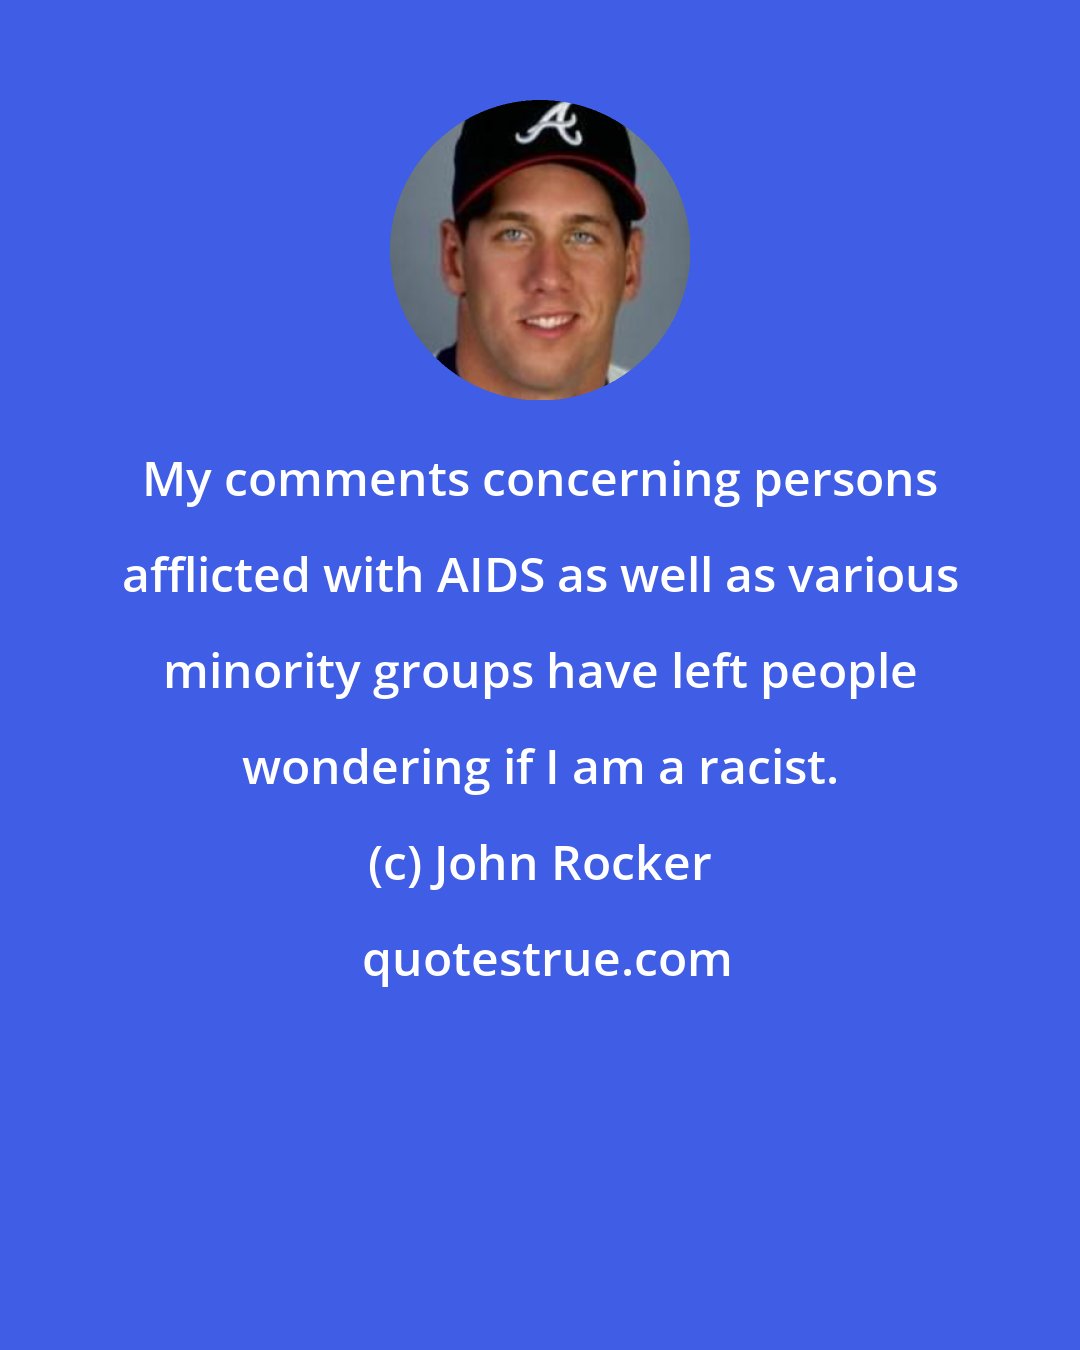 John Rocker: My comments concerning persons afflicted with AIDS as well as various minority groups have left people wondering if I am a racist.